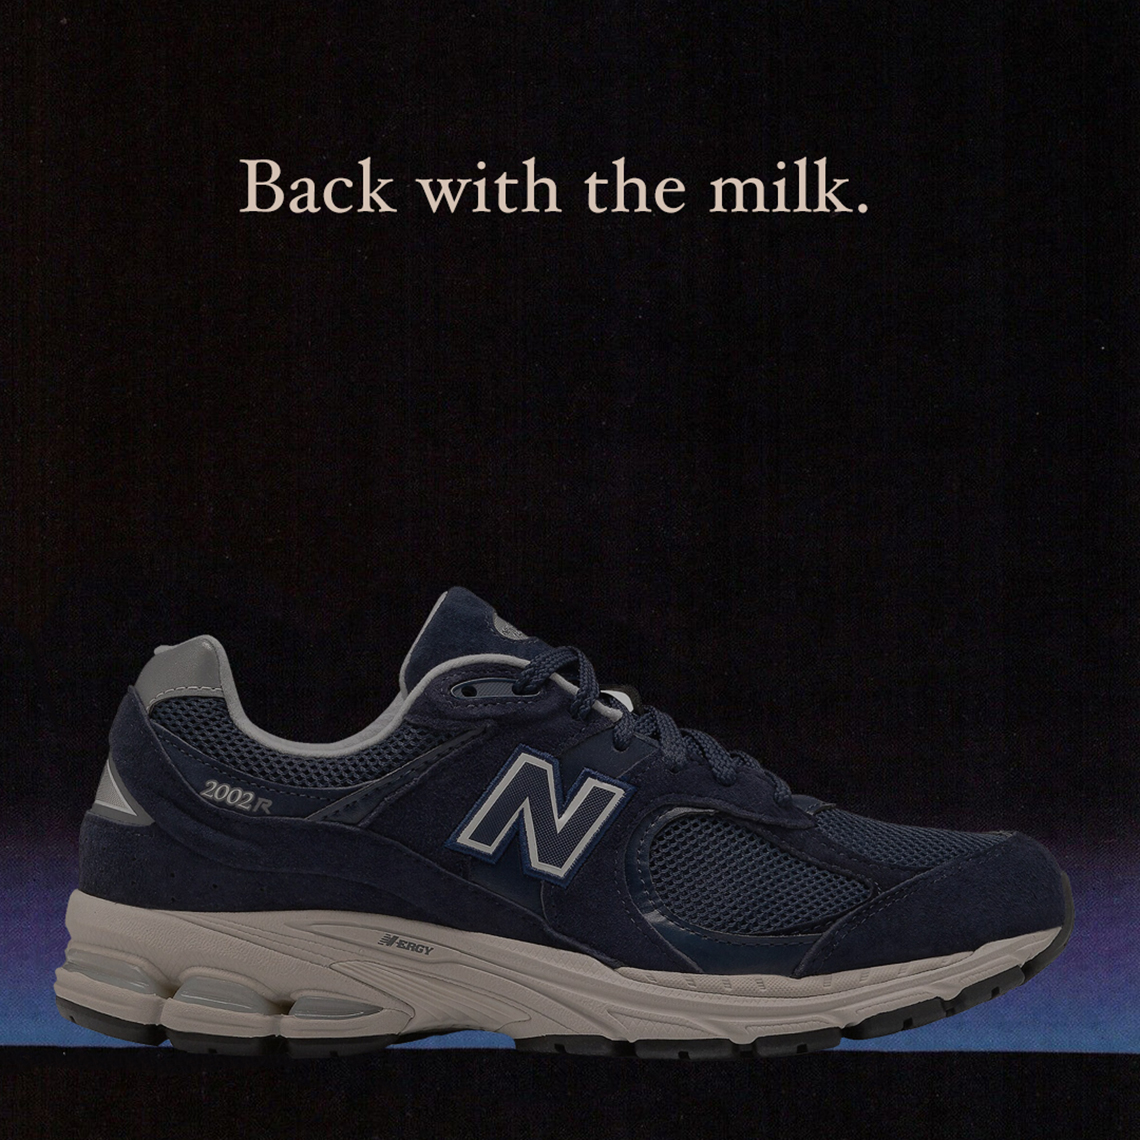 New Balance Shopping Guide 2020 2002r